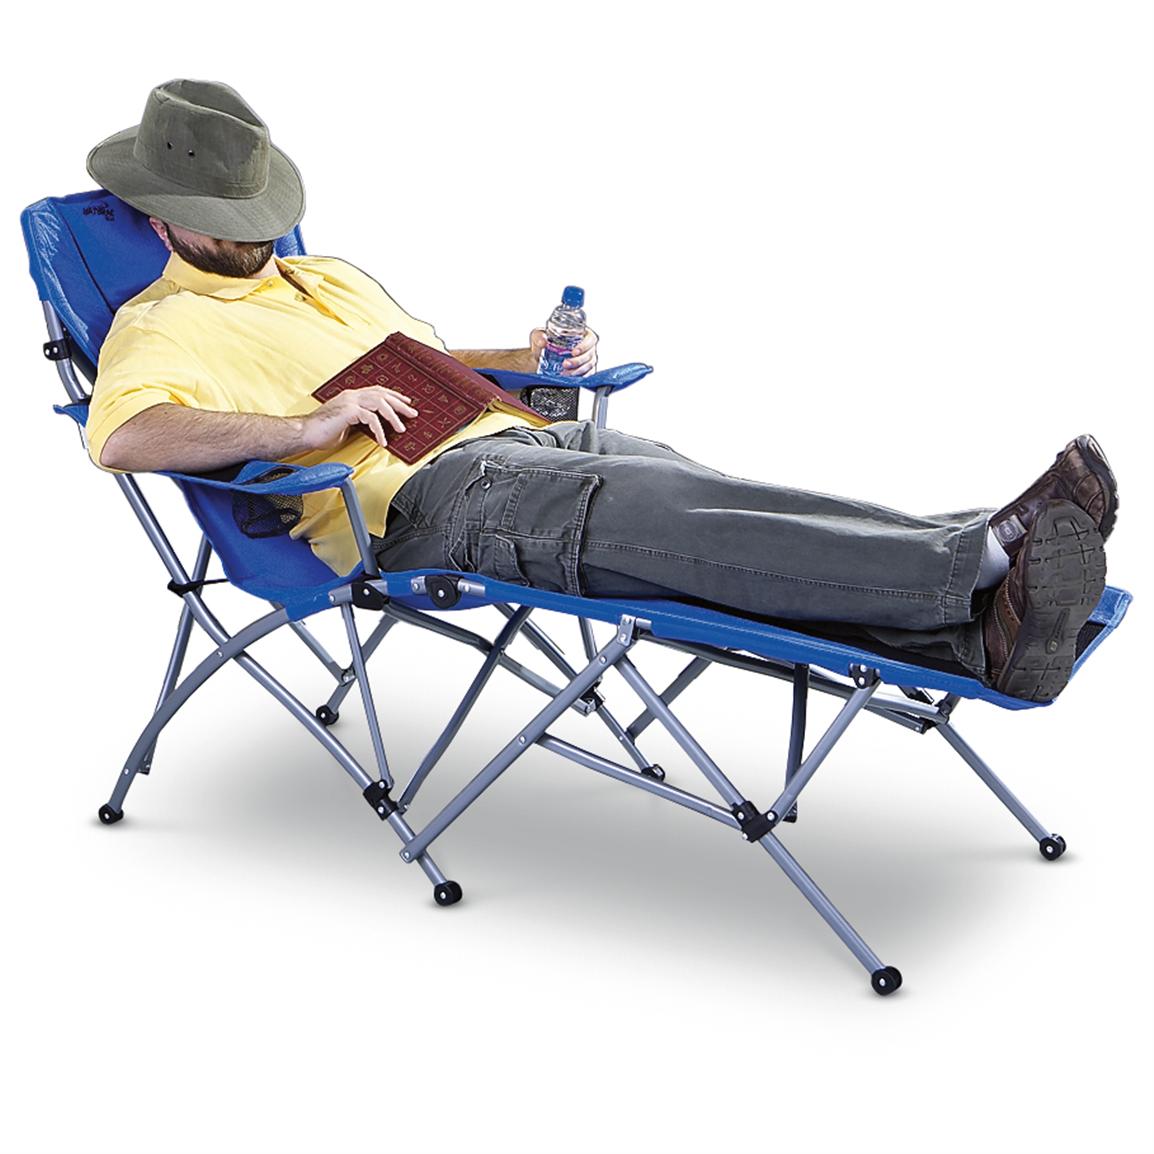 Folding Lounge Chair - 180115, Chairs at Sportsman's Guide